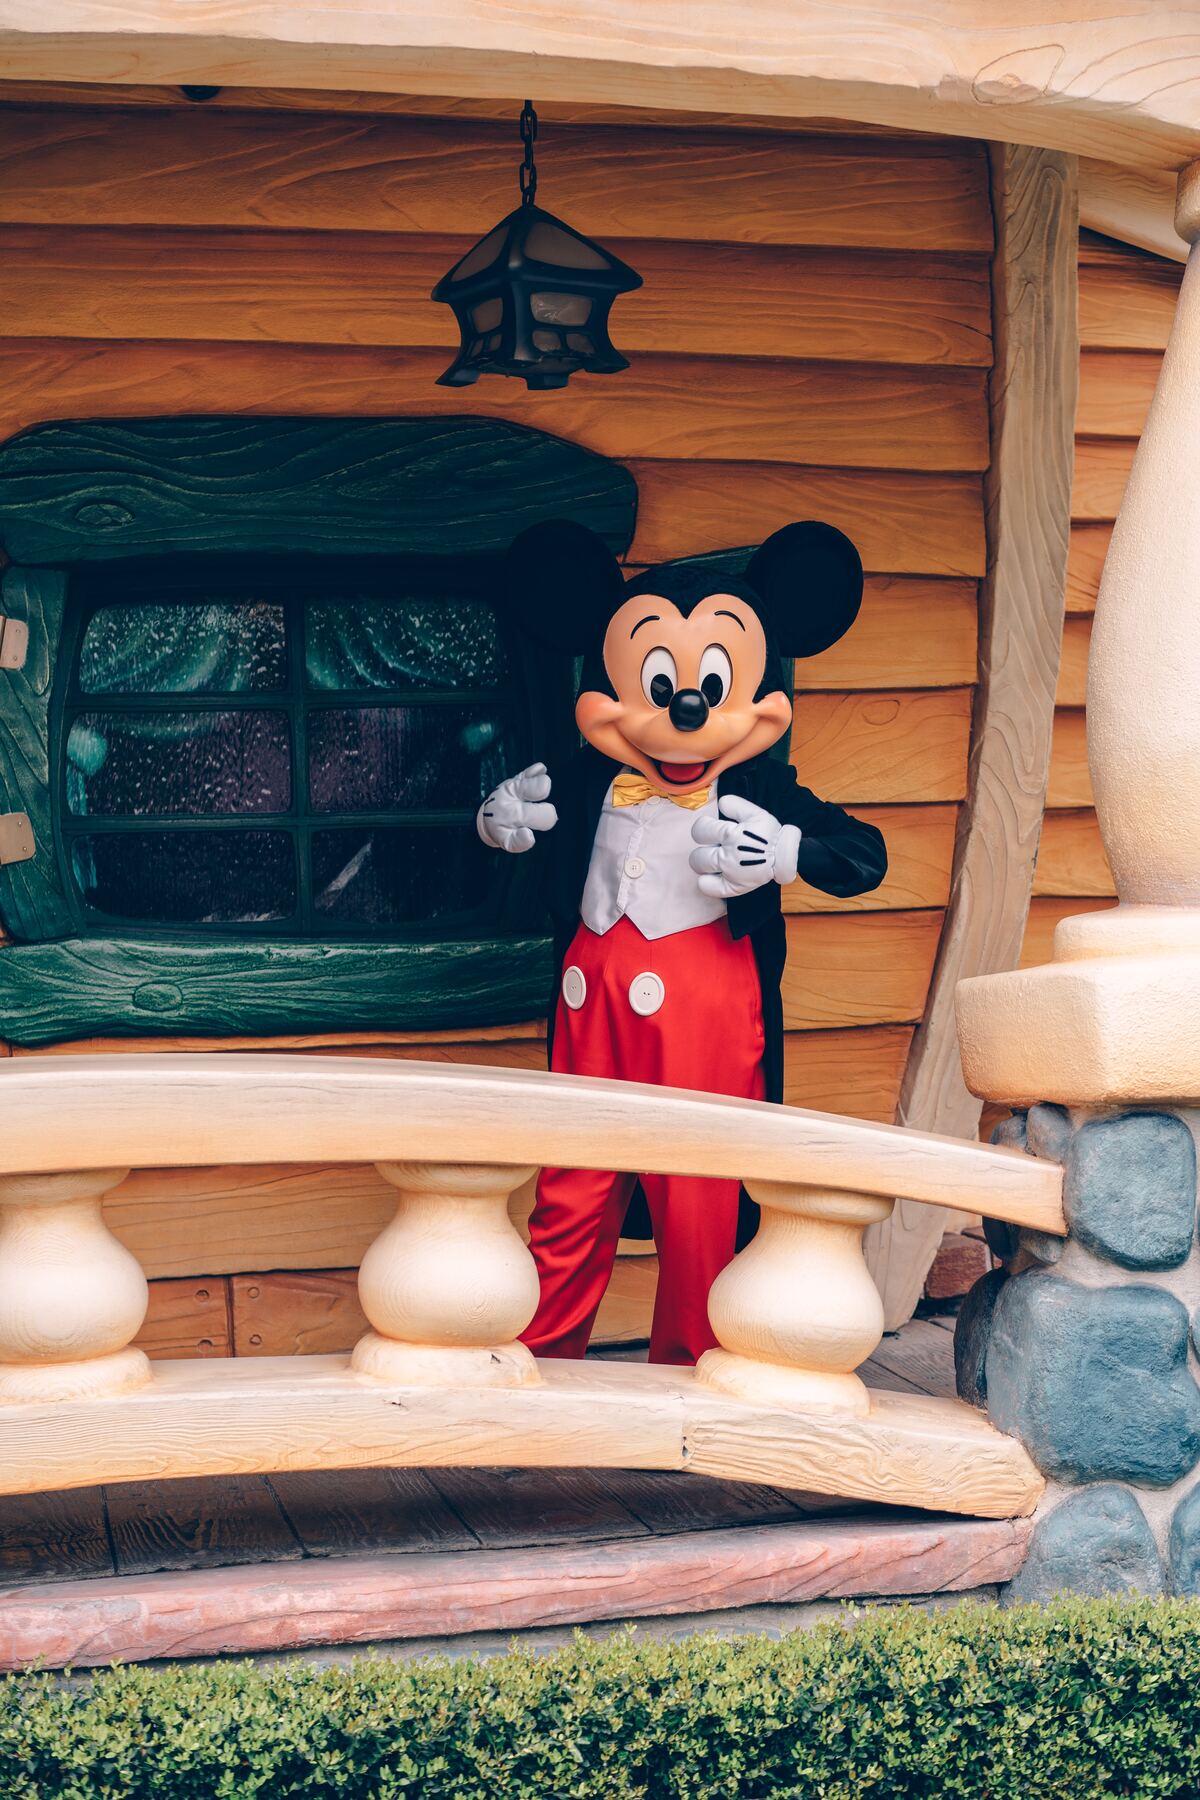 Mickey Mouse wearing a tuxedo as he gestures to himself with a smile